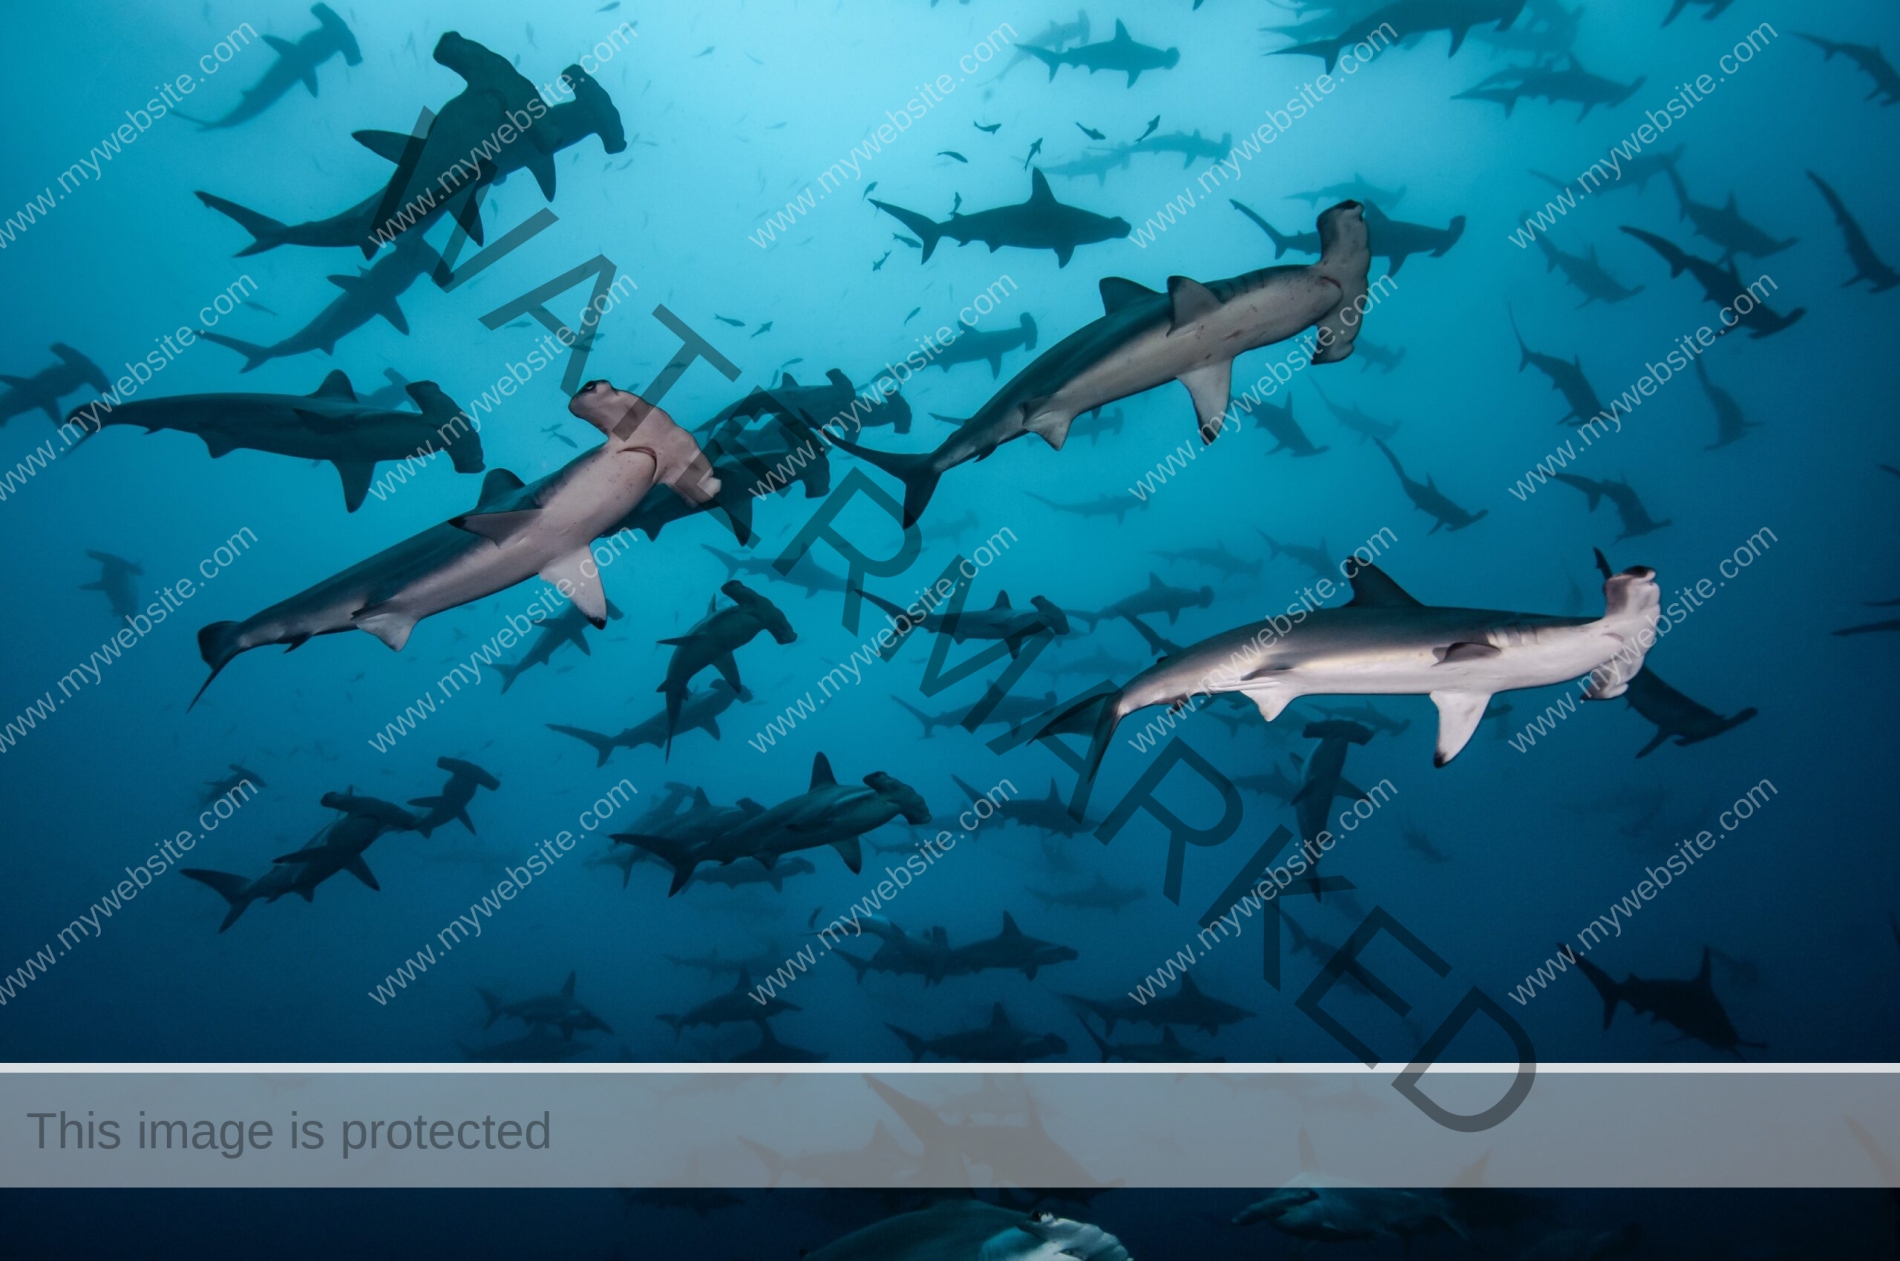 Serene deep blue photograph of hundreds of hammerhead sharks off Cocos Island by award-winning Costa Rican photographer Edwar Herreno. You are looking up at the sharks as they apepar to swim near the surface, with a few close-up near the camera, evoking feelings of awe and wonder. side view hammerhead photograph.